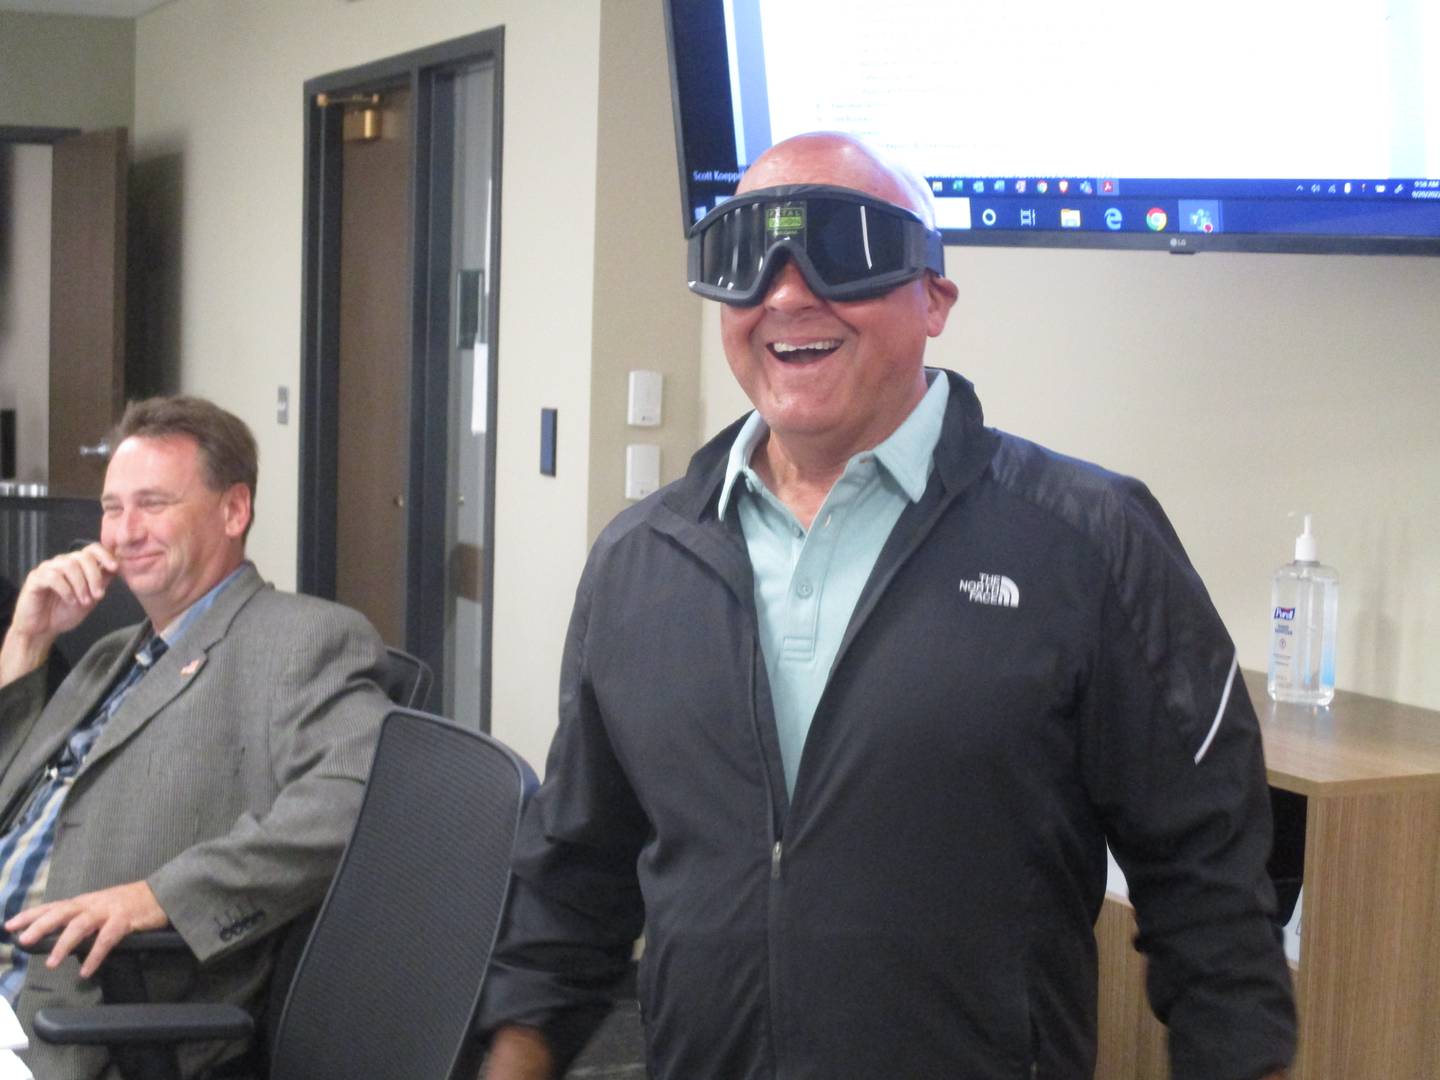 Kendall County Board member Ruben Rodriguez reacts to the change in his visual perception while wearing goggles designed to simulate the effects of marijuana on Sept. 20, 2022.